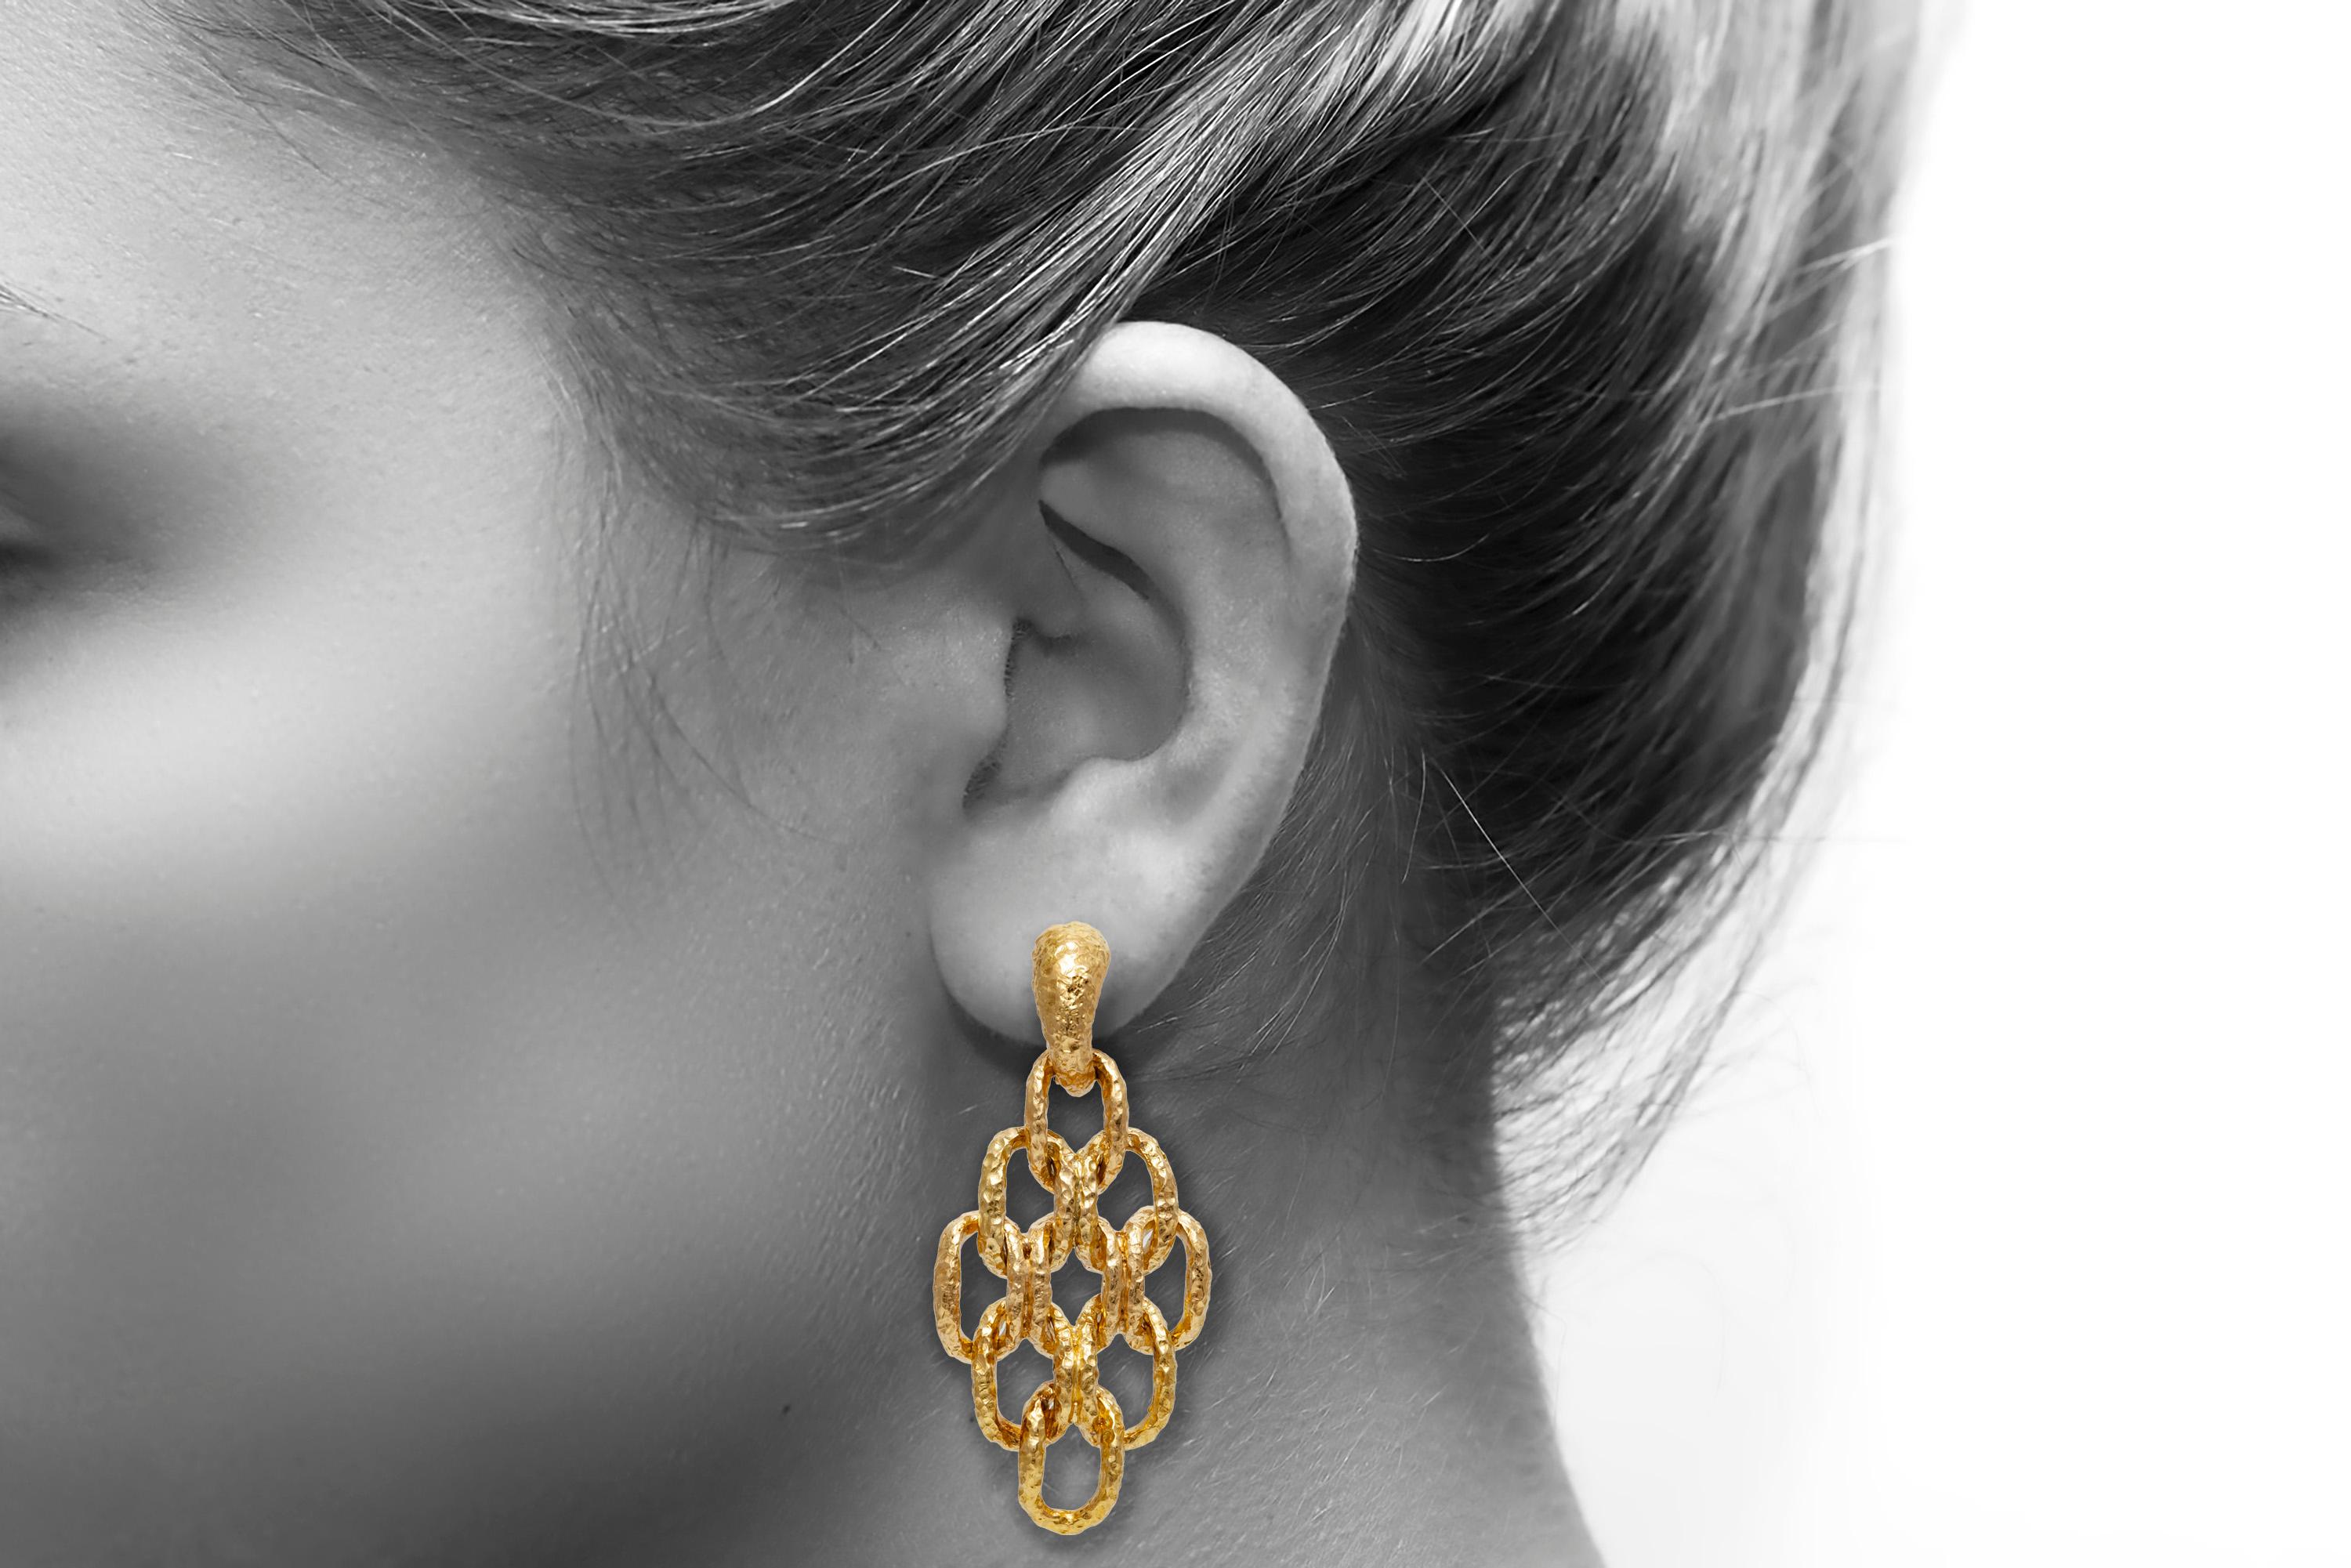 Van Cleef & Arpels earrings, finely crafted in 18k yellow gold weighing 29.9 dwt.